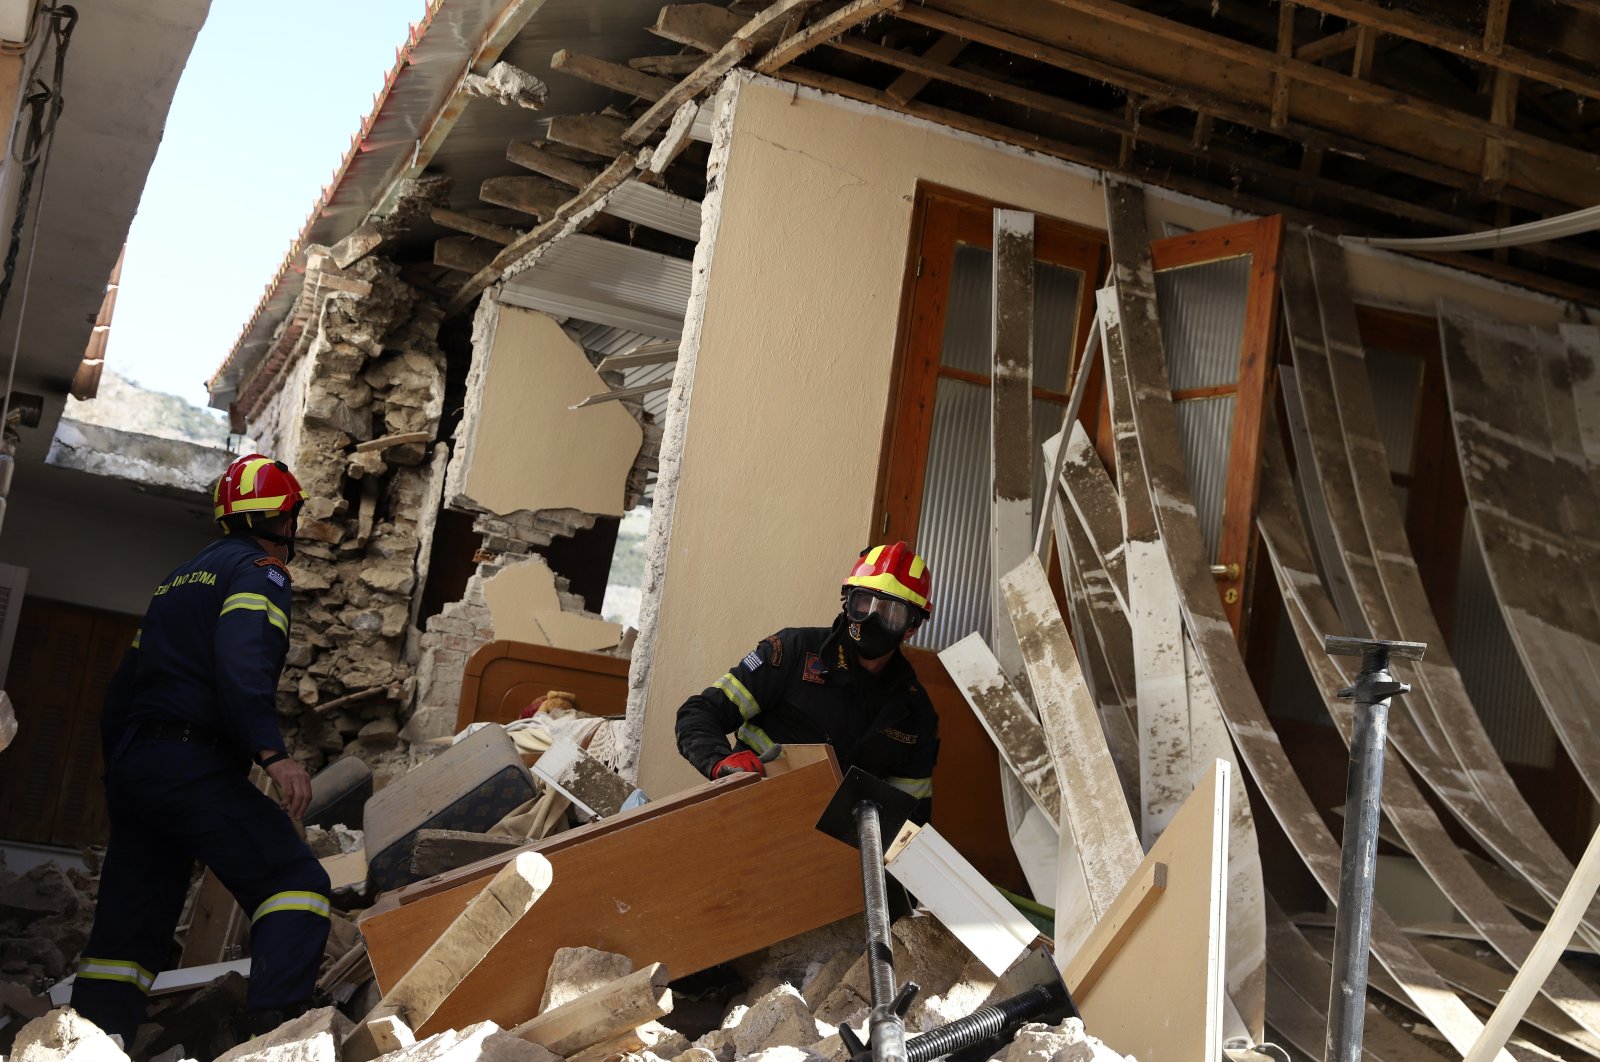 Firefighters search inside a damaged house after an earthquake in Damasi village, central Greece, Thursday, March 4, 2021. (AP Photo)